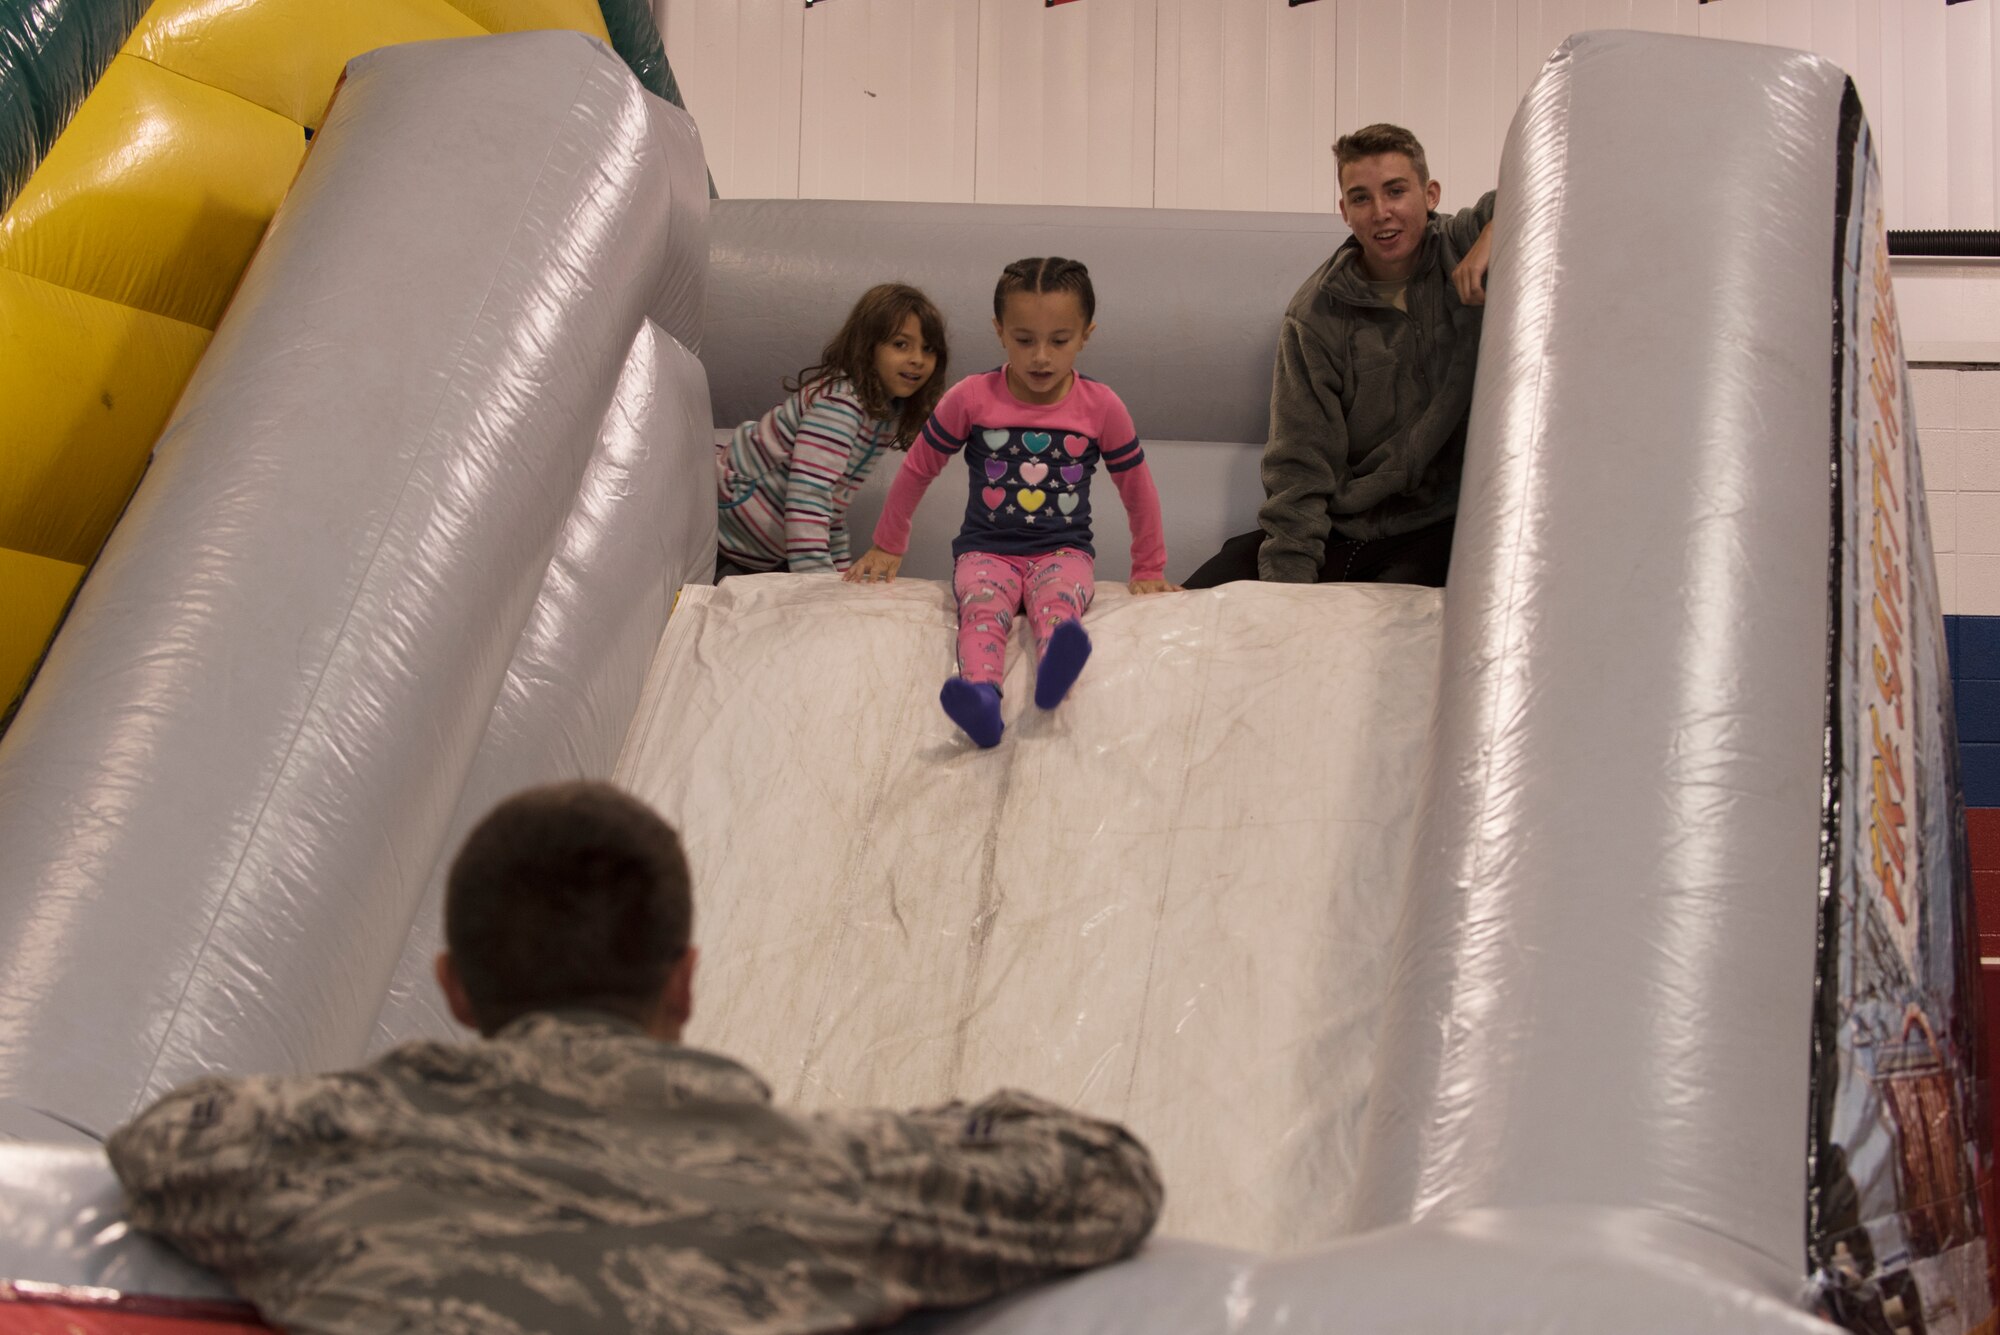 Airman Andrew Tassey, a member of the Fire and Emergency Services Team at Whiteman Air Force Base, Missouri, supervises Whiteman Elementary first graders as they slide down a bouncy house slide on October 10, 2019. The 2019 Fire Prevention Week campaign theme is "Not Every Hero Wears a Cape. Plan and Practice Your Escape". (U.S. Air Force photo by Staff Sgt. Kayla White)